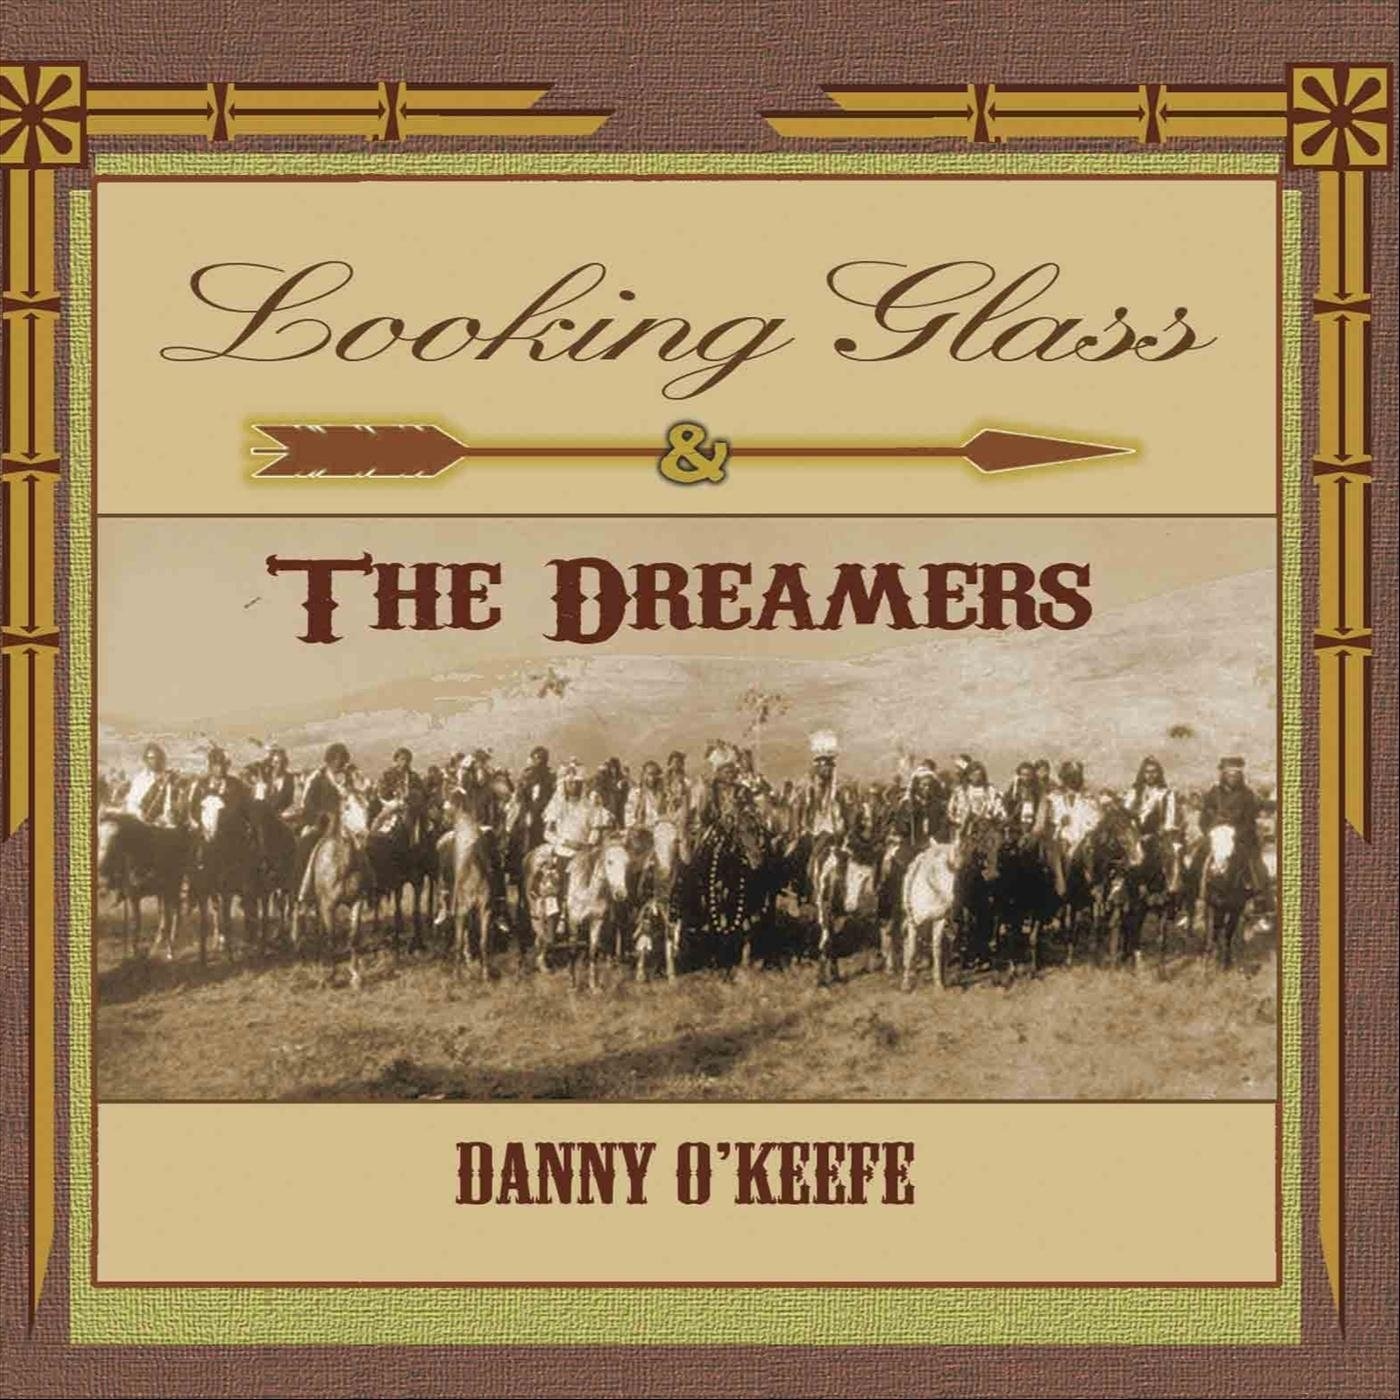 Danny O'Keefe - 2020 - Looking Glass & the Dreamers